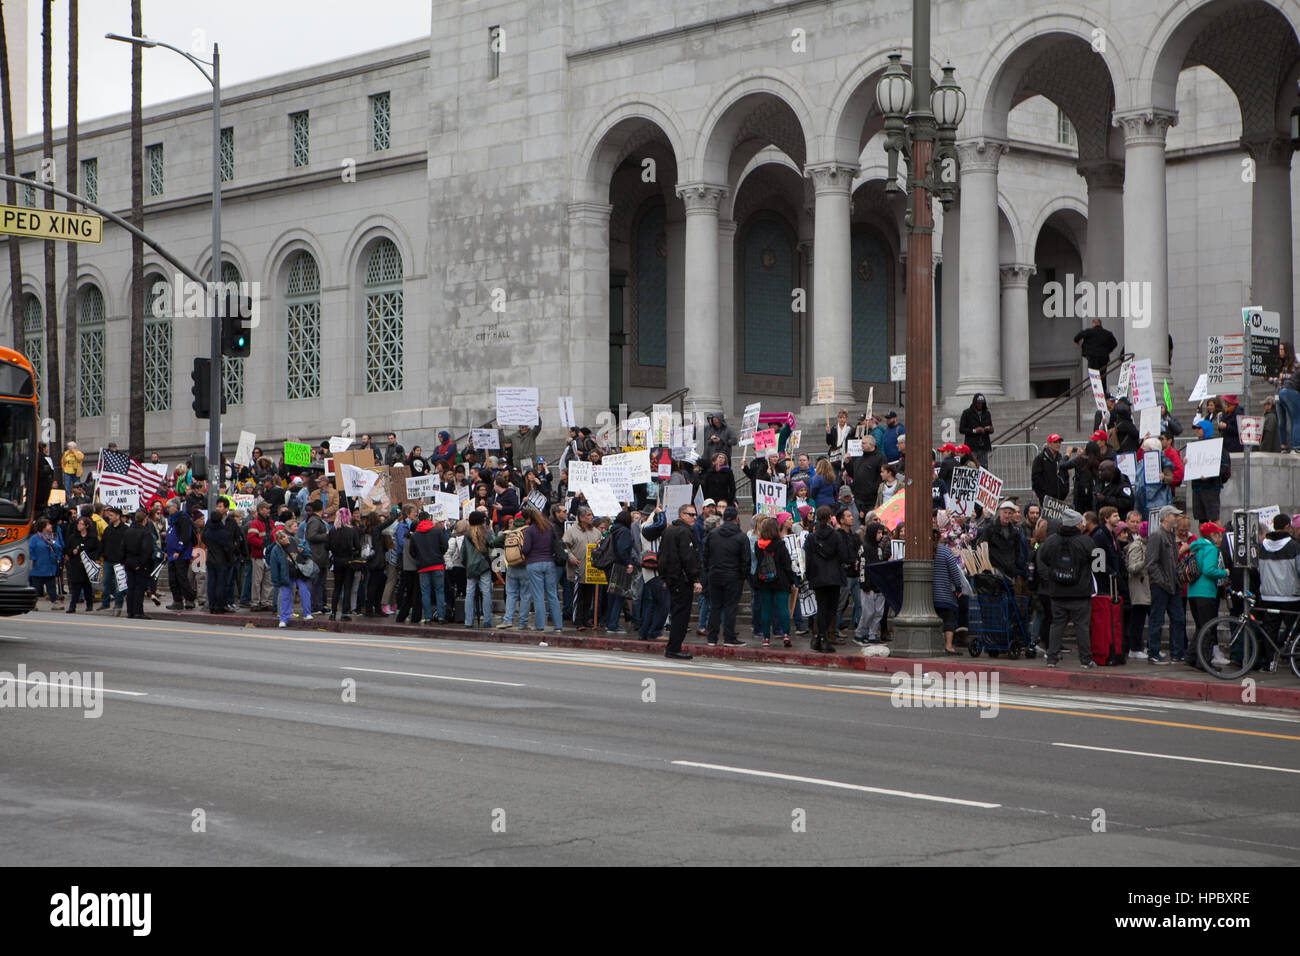 Los Angeles, USA. 20 February, 2017. Protestors gather at Los Angeles city hall for ‘Not Presidents Day’ rally. Zack Clark/Alamay Live News Stock Photo